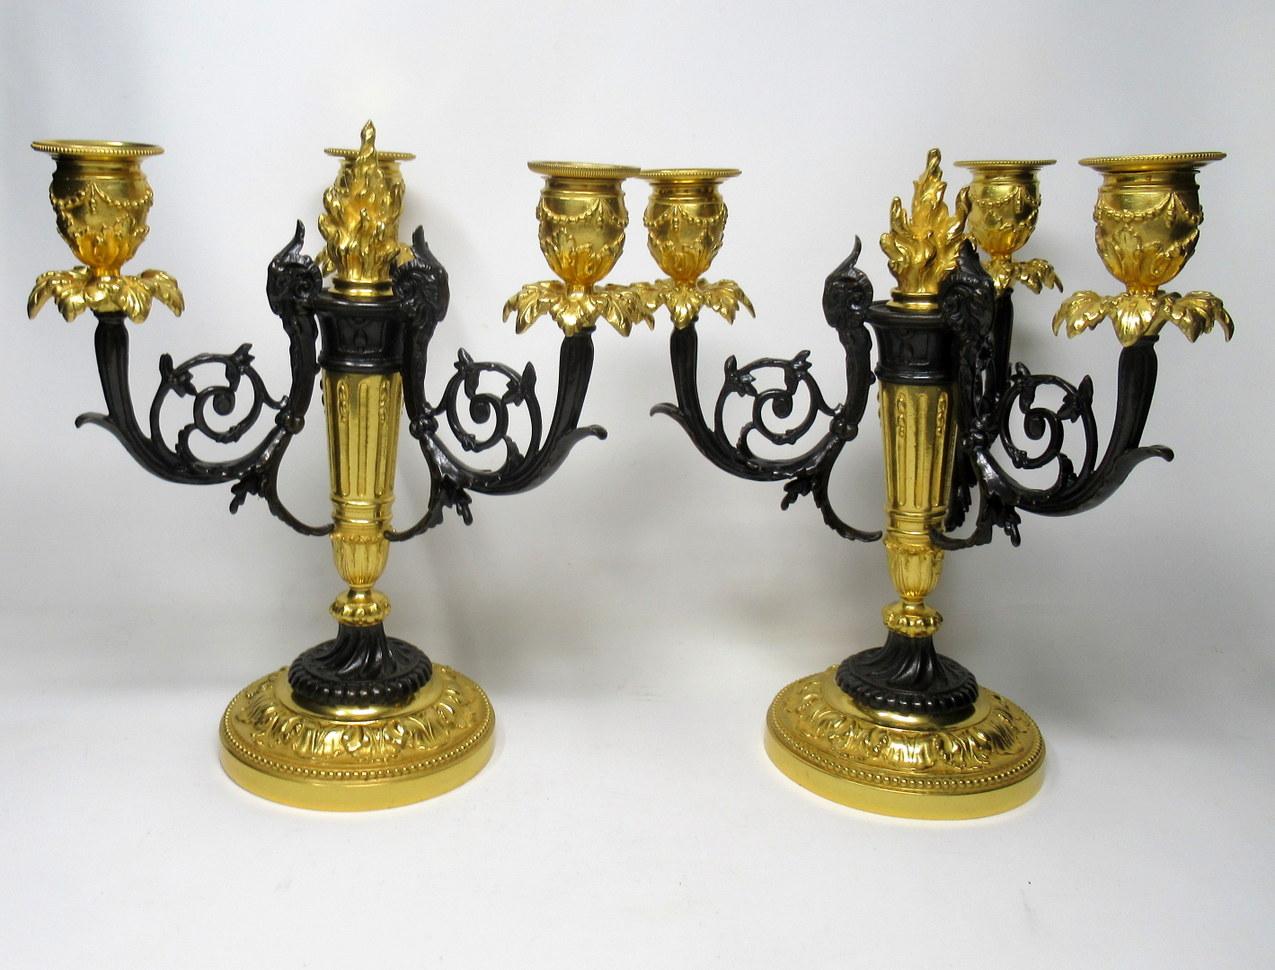 An exceptionally fine quality pair of French gilt & patinated bronze three-arm candelabra of generous proportions and good heavy gauge, made during the first half of the 19th century. 

The finely chased sconces issuing from three scrolling arms